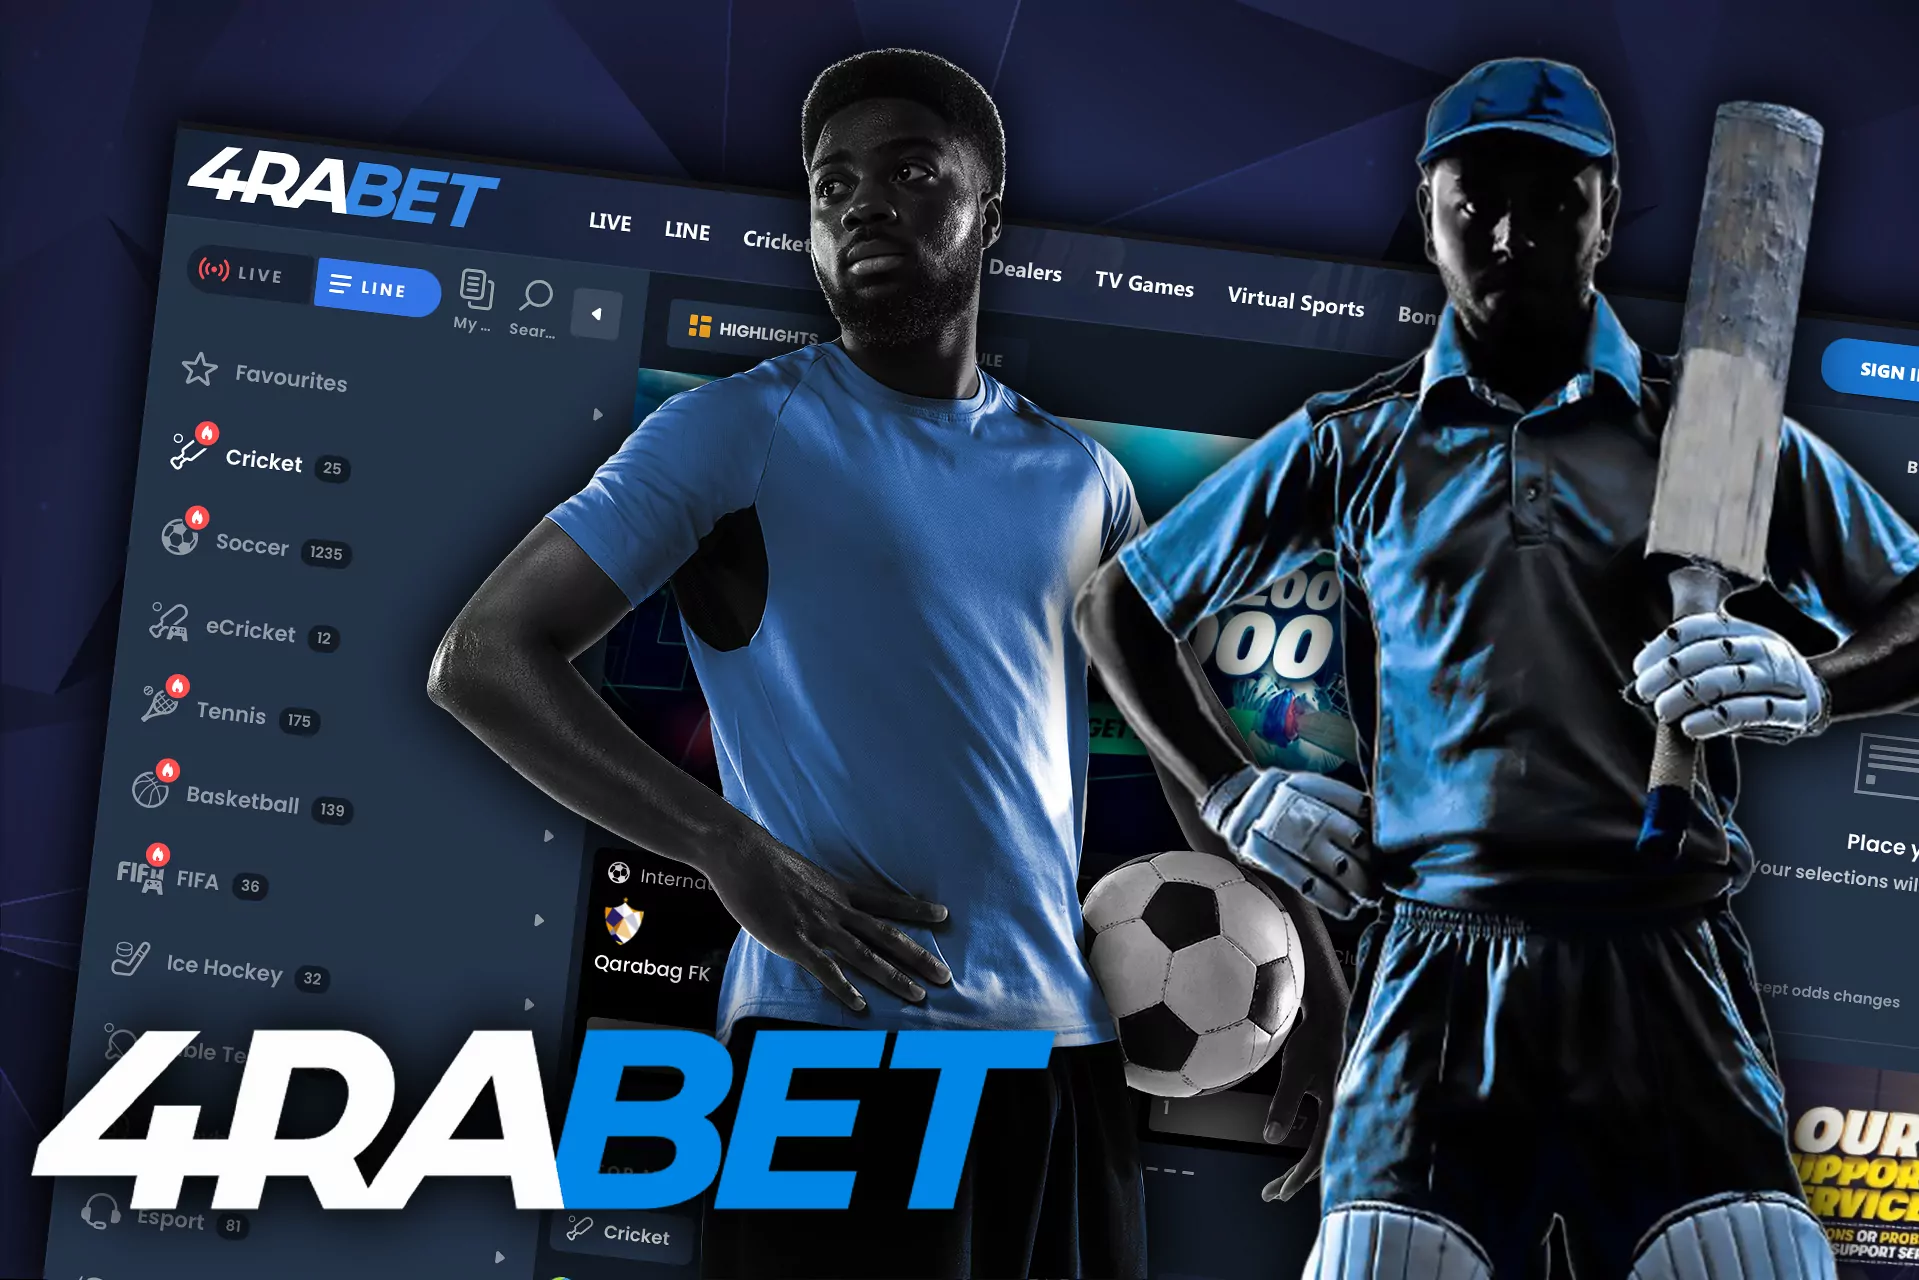 We follow all events, both global and regional, giving 4Rabet users the greatest variety to meet their betting needs!